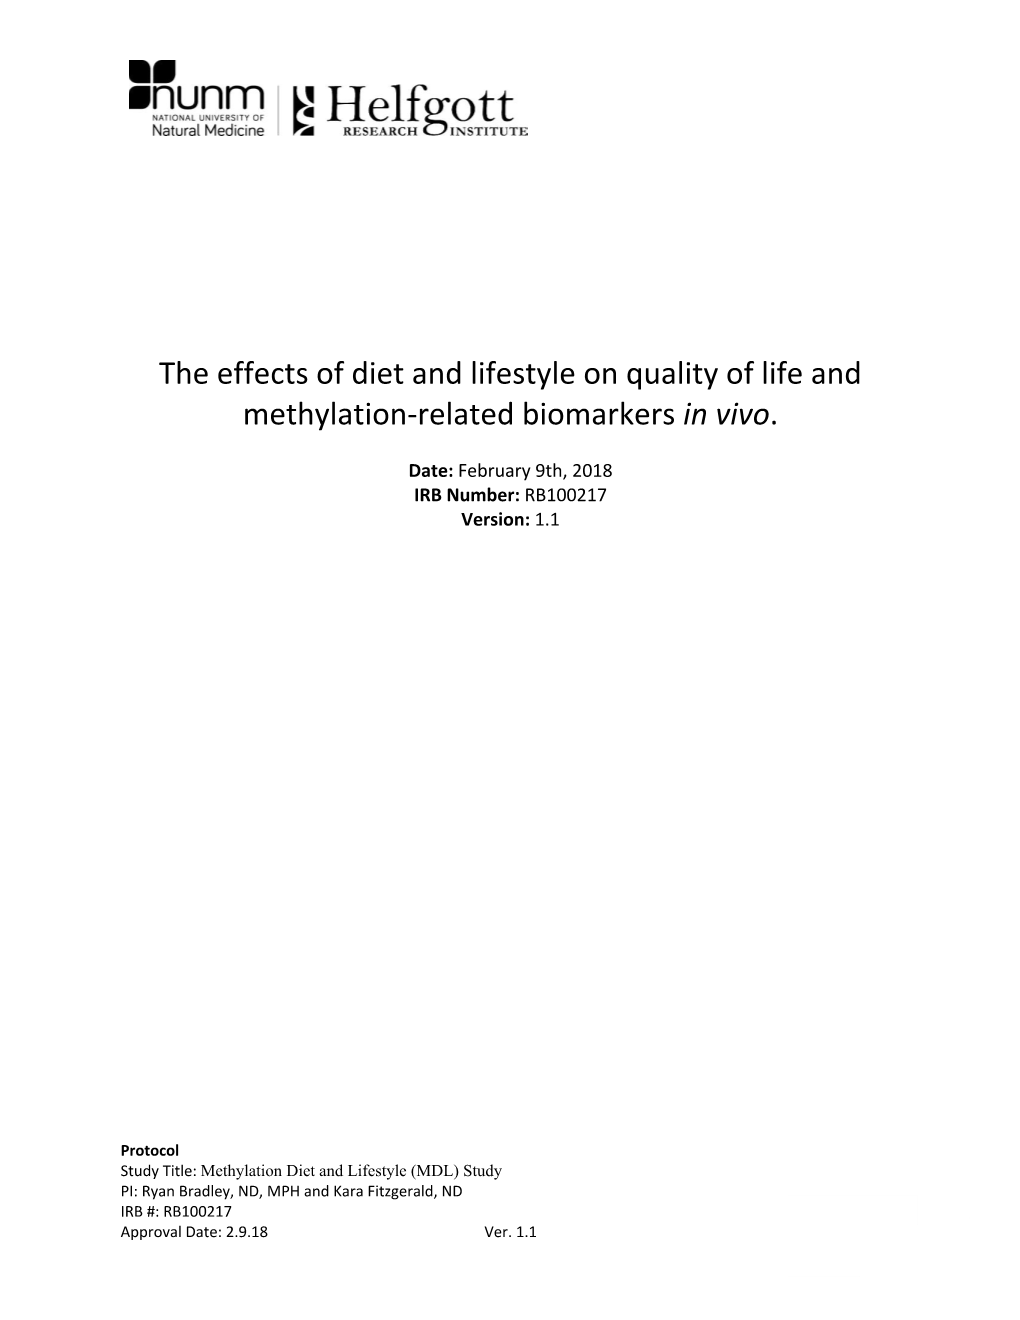 The Effects of Diet and Lifestyle on Quality of Life and Methylation-Related Biomarkers in Vivo